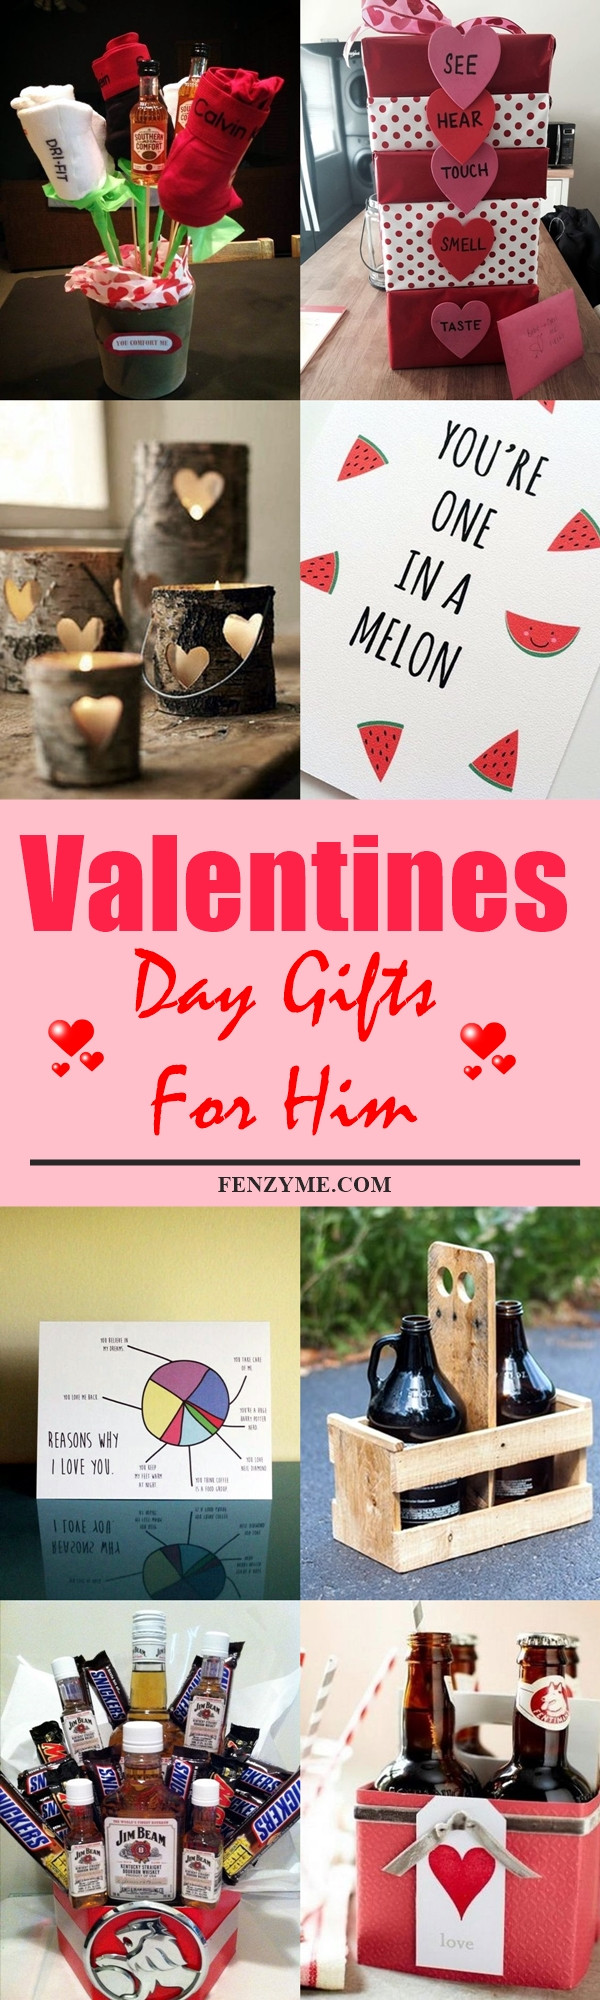 Gifts For Him Valentines Day
 80 Handcrafted Valentines Day Gifts For Him to Express